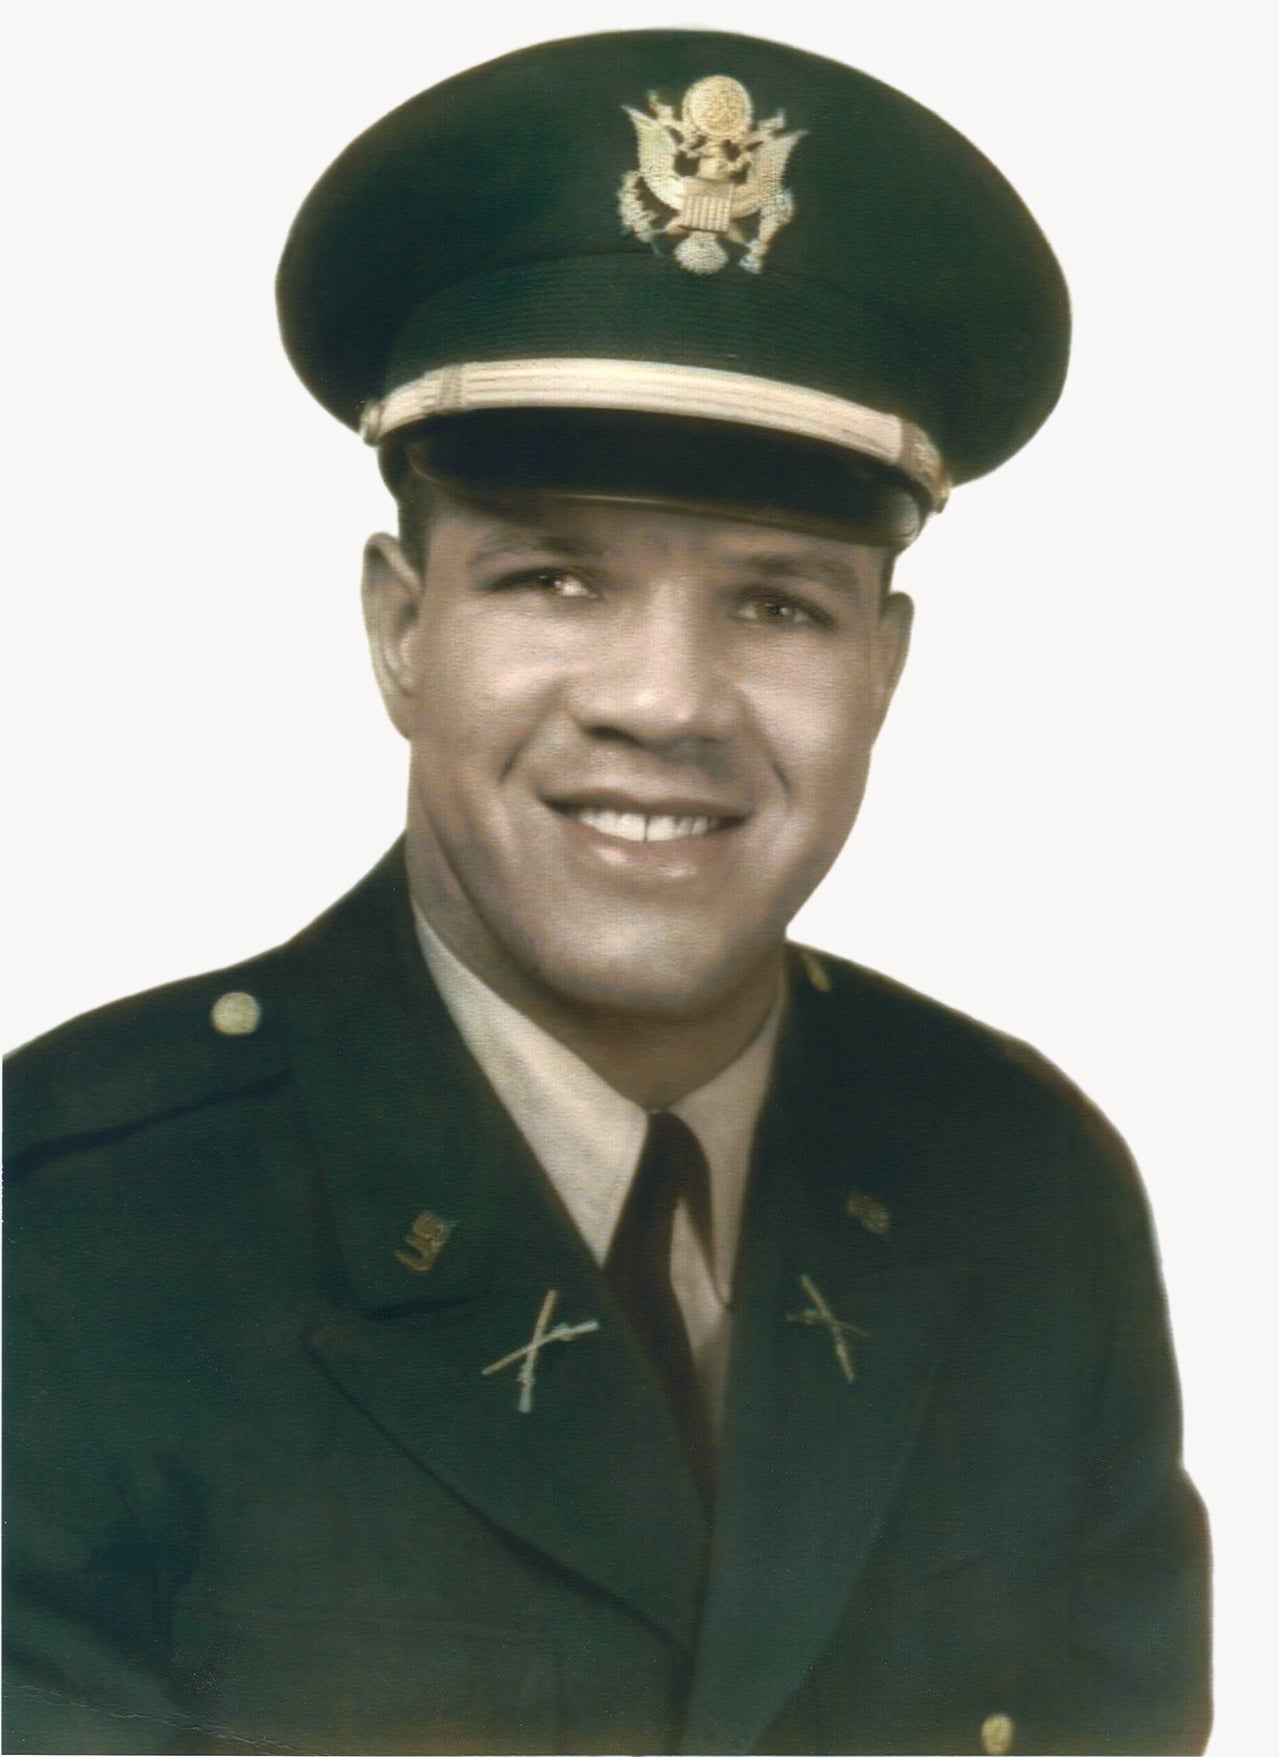 Then-Capt. Davis circa the early 1960s. (Credit: U.S. Army)